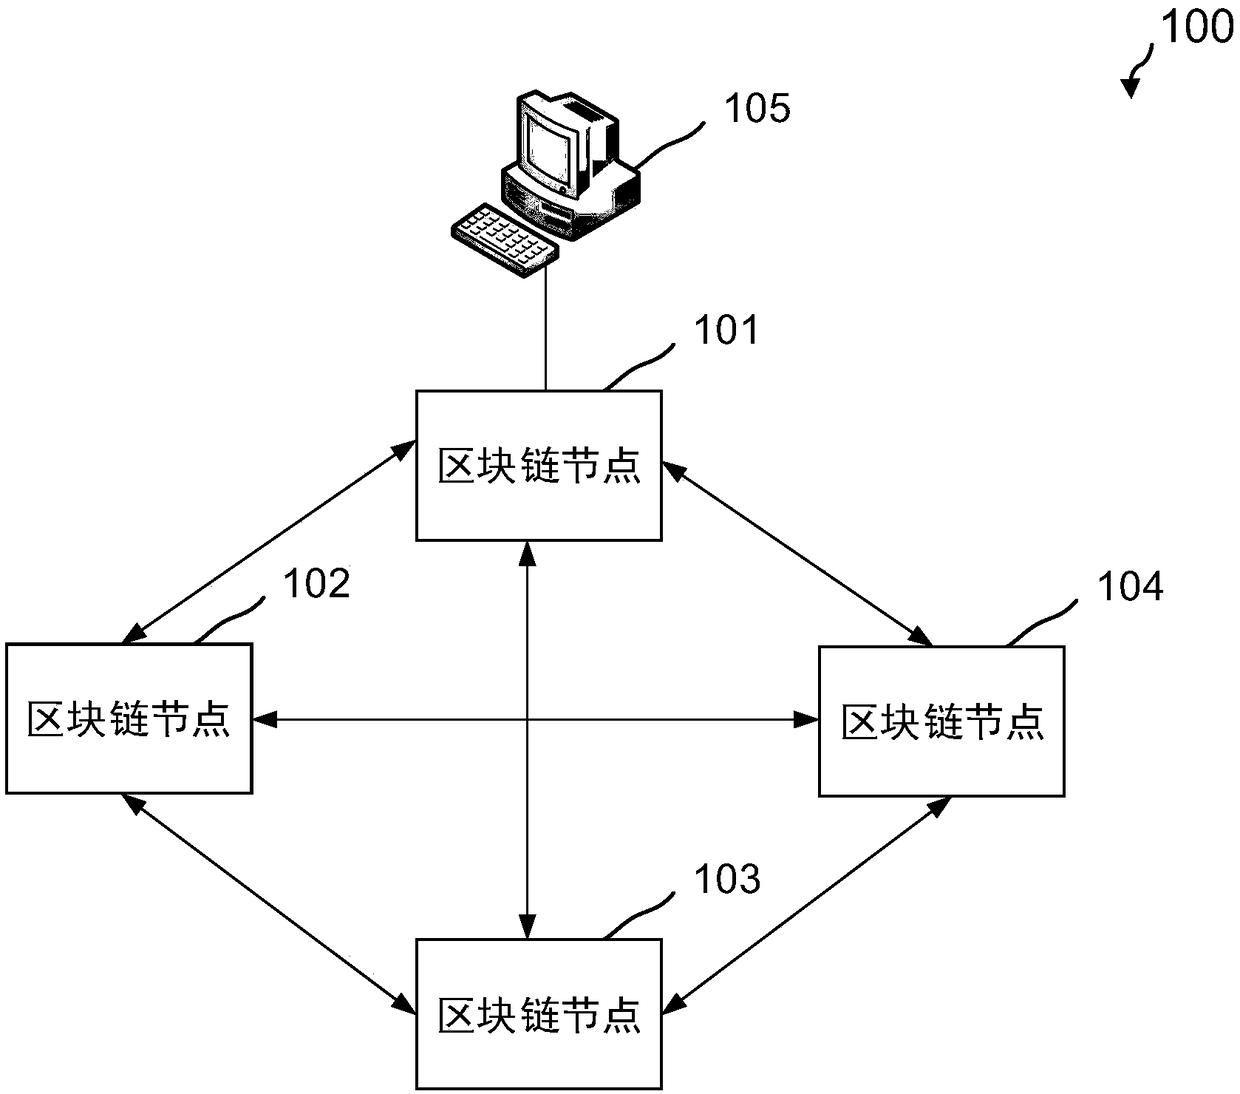 Securities product processing method and device for asset generalization based on block chain